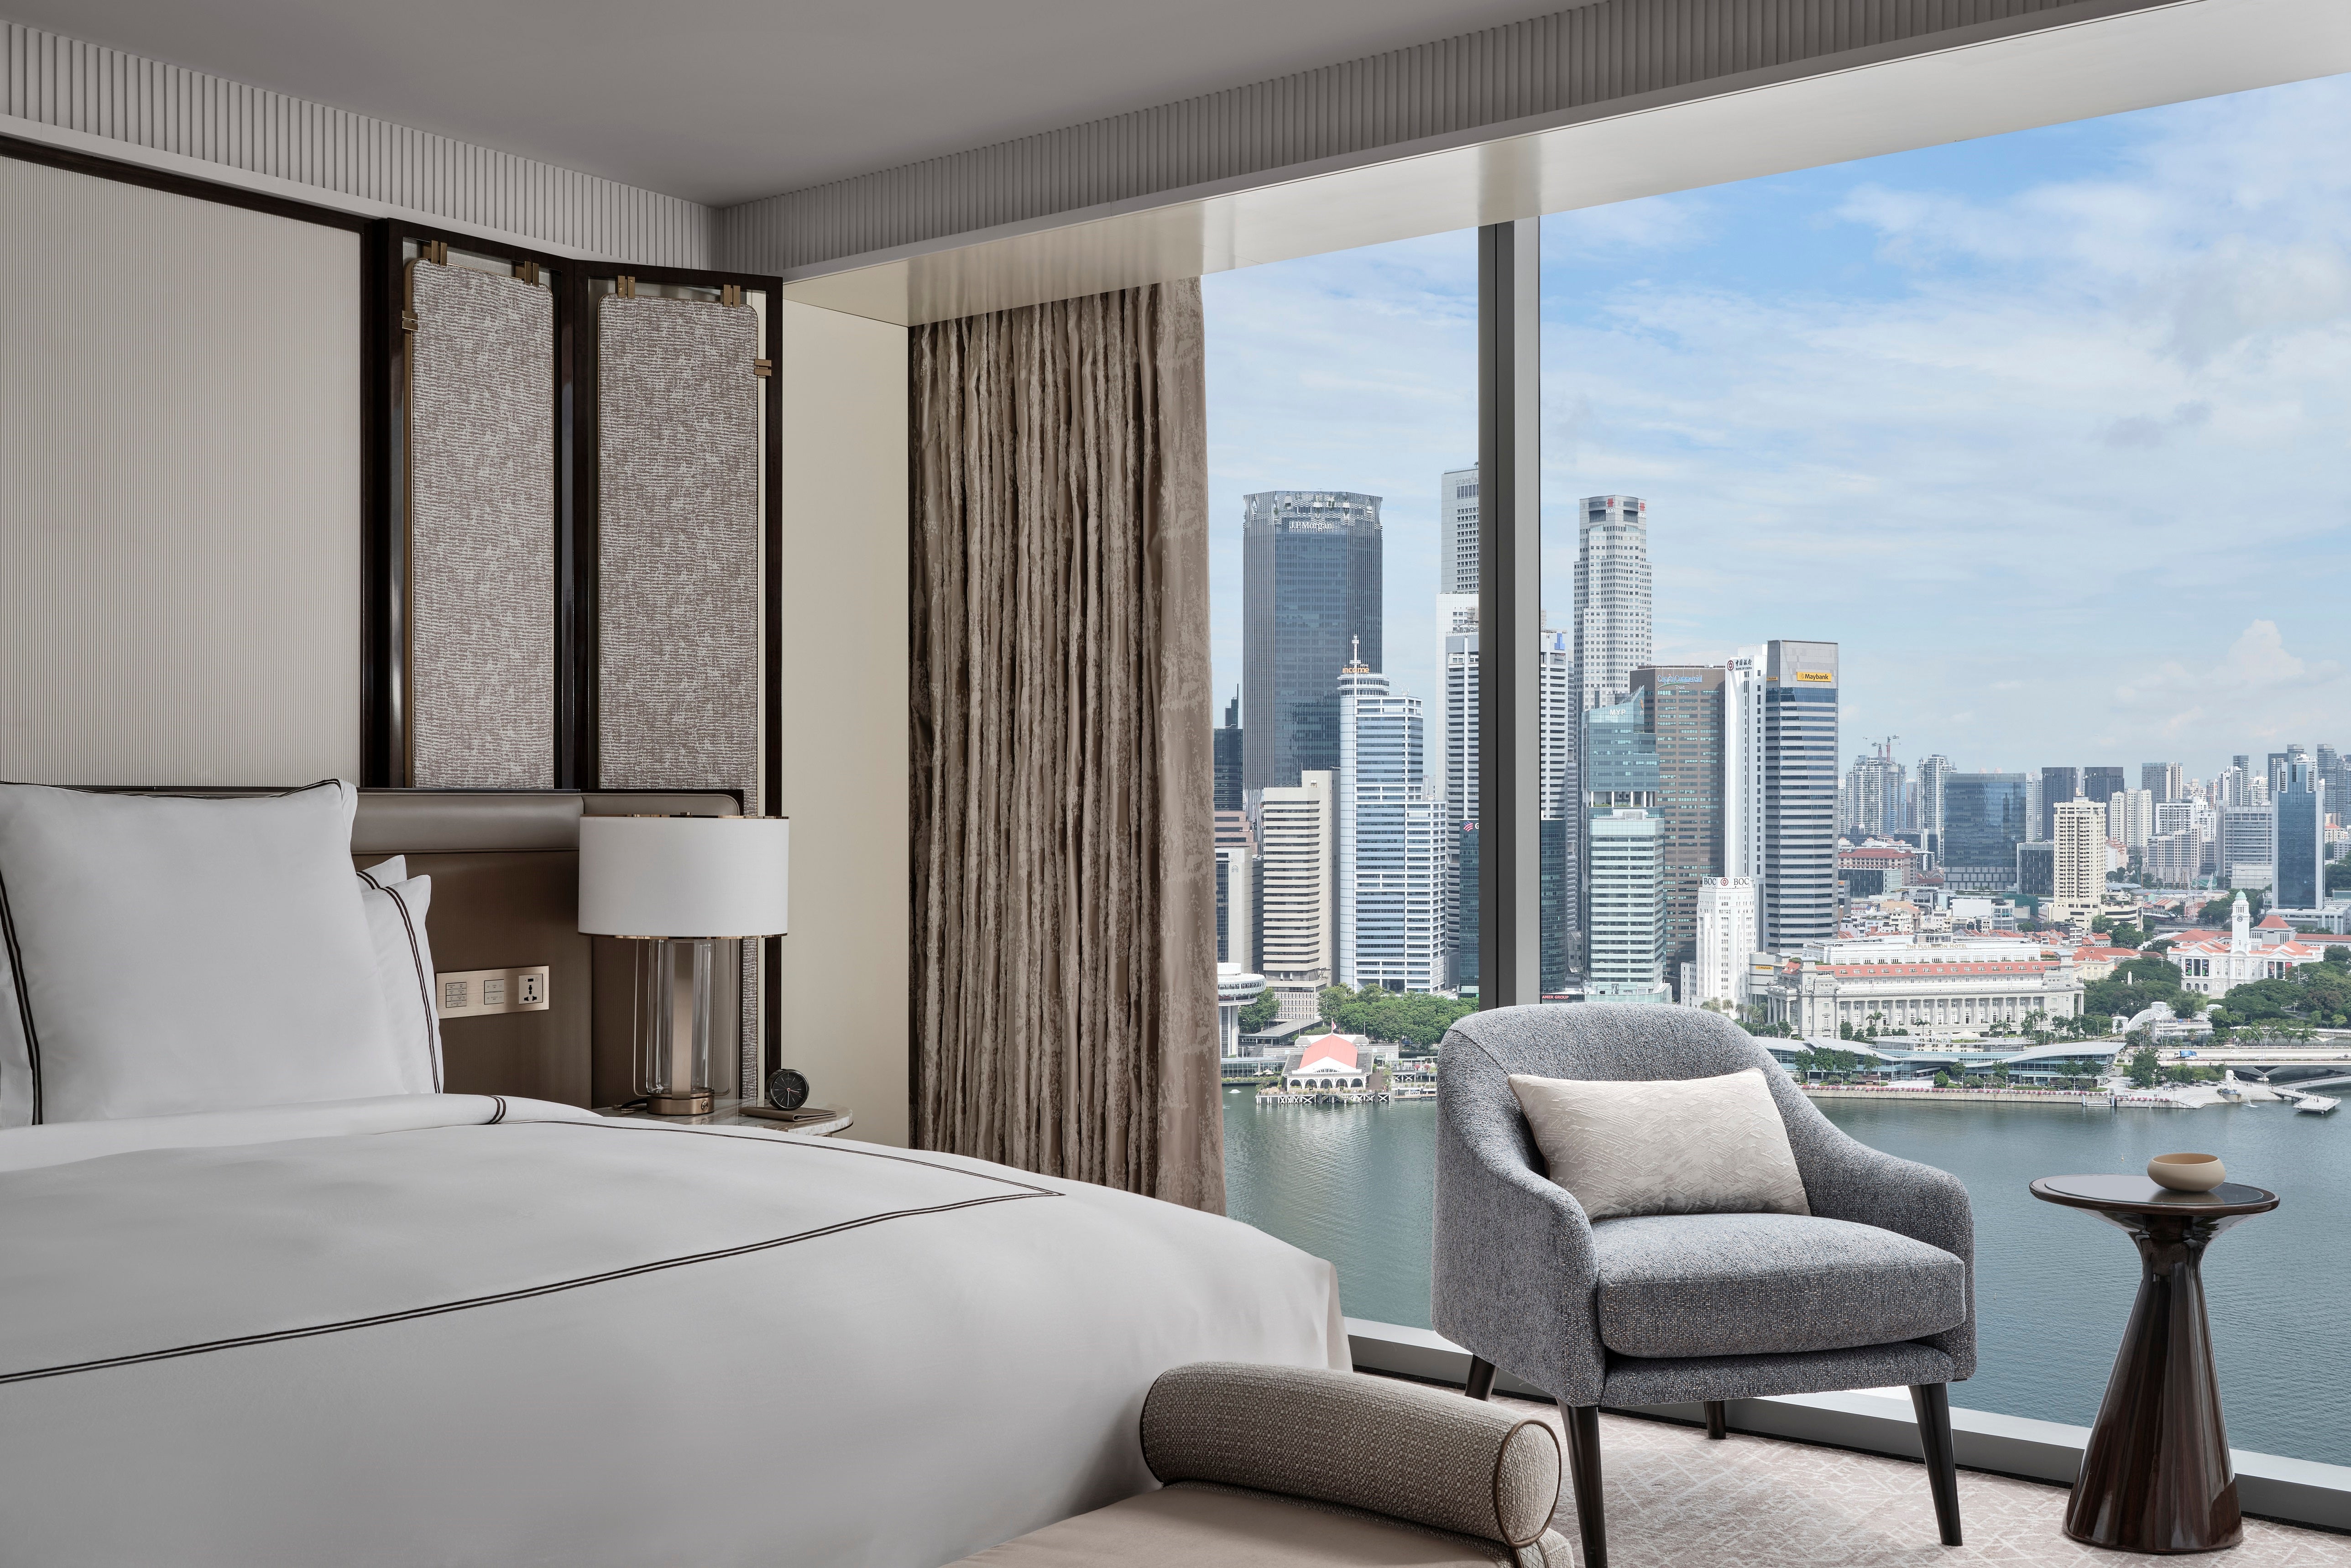 A view of the skyline from one of Marina Bay Sands’ new luxury suites